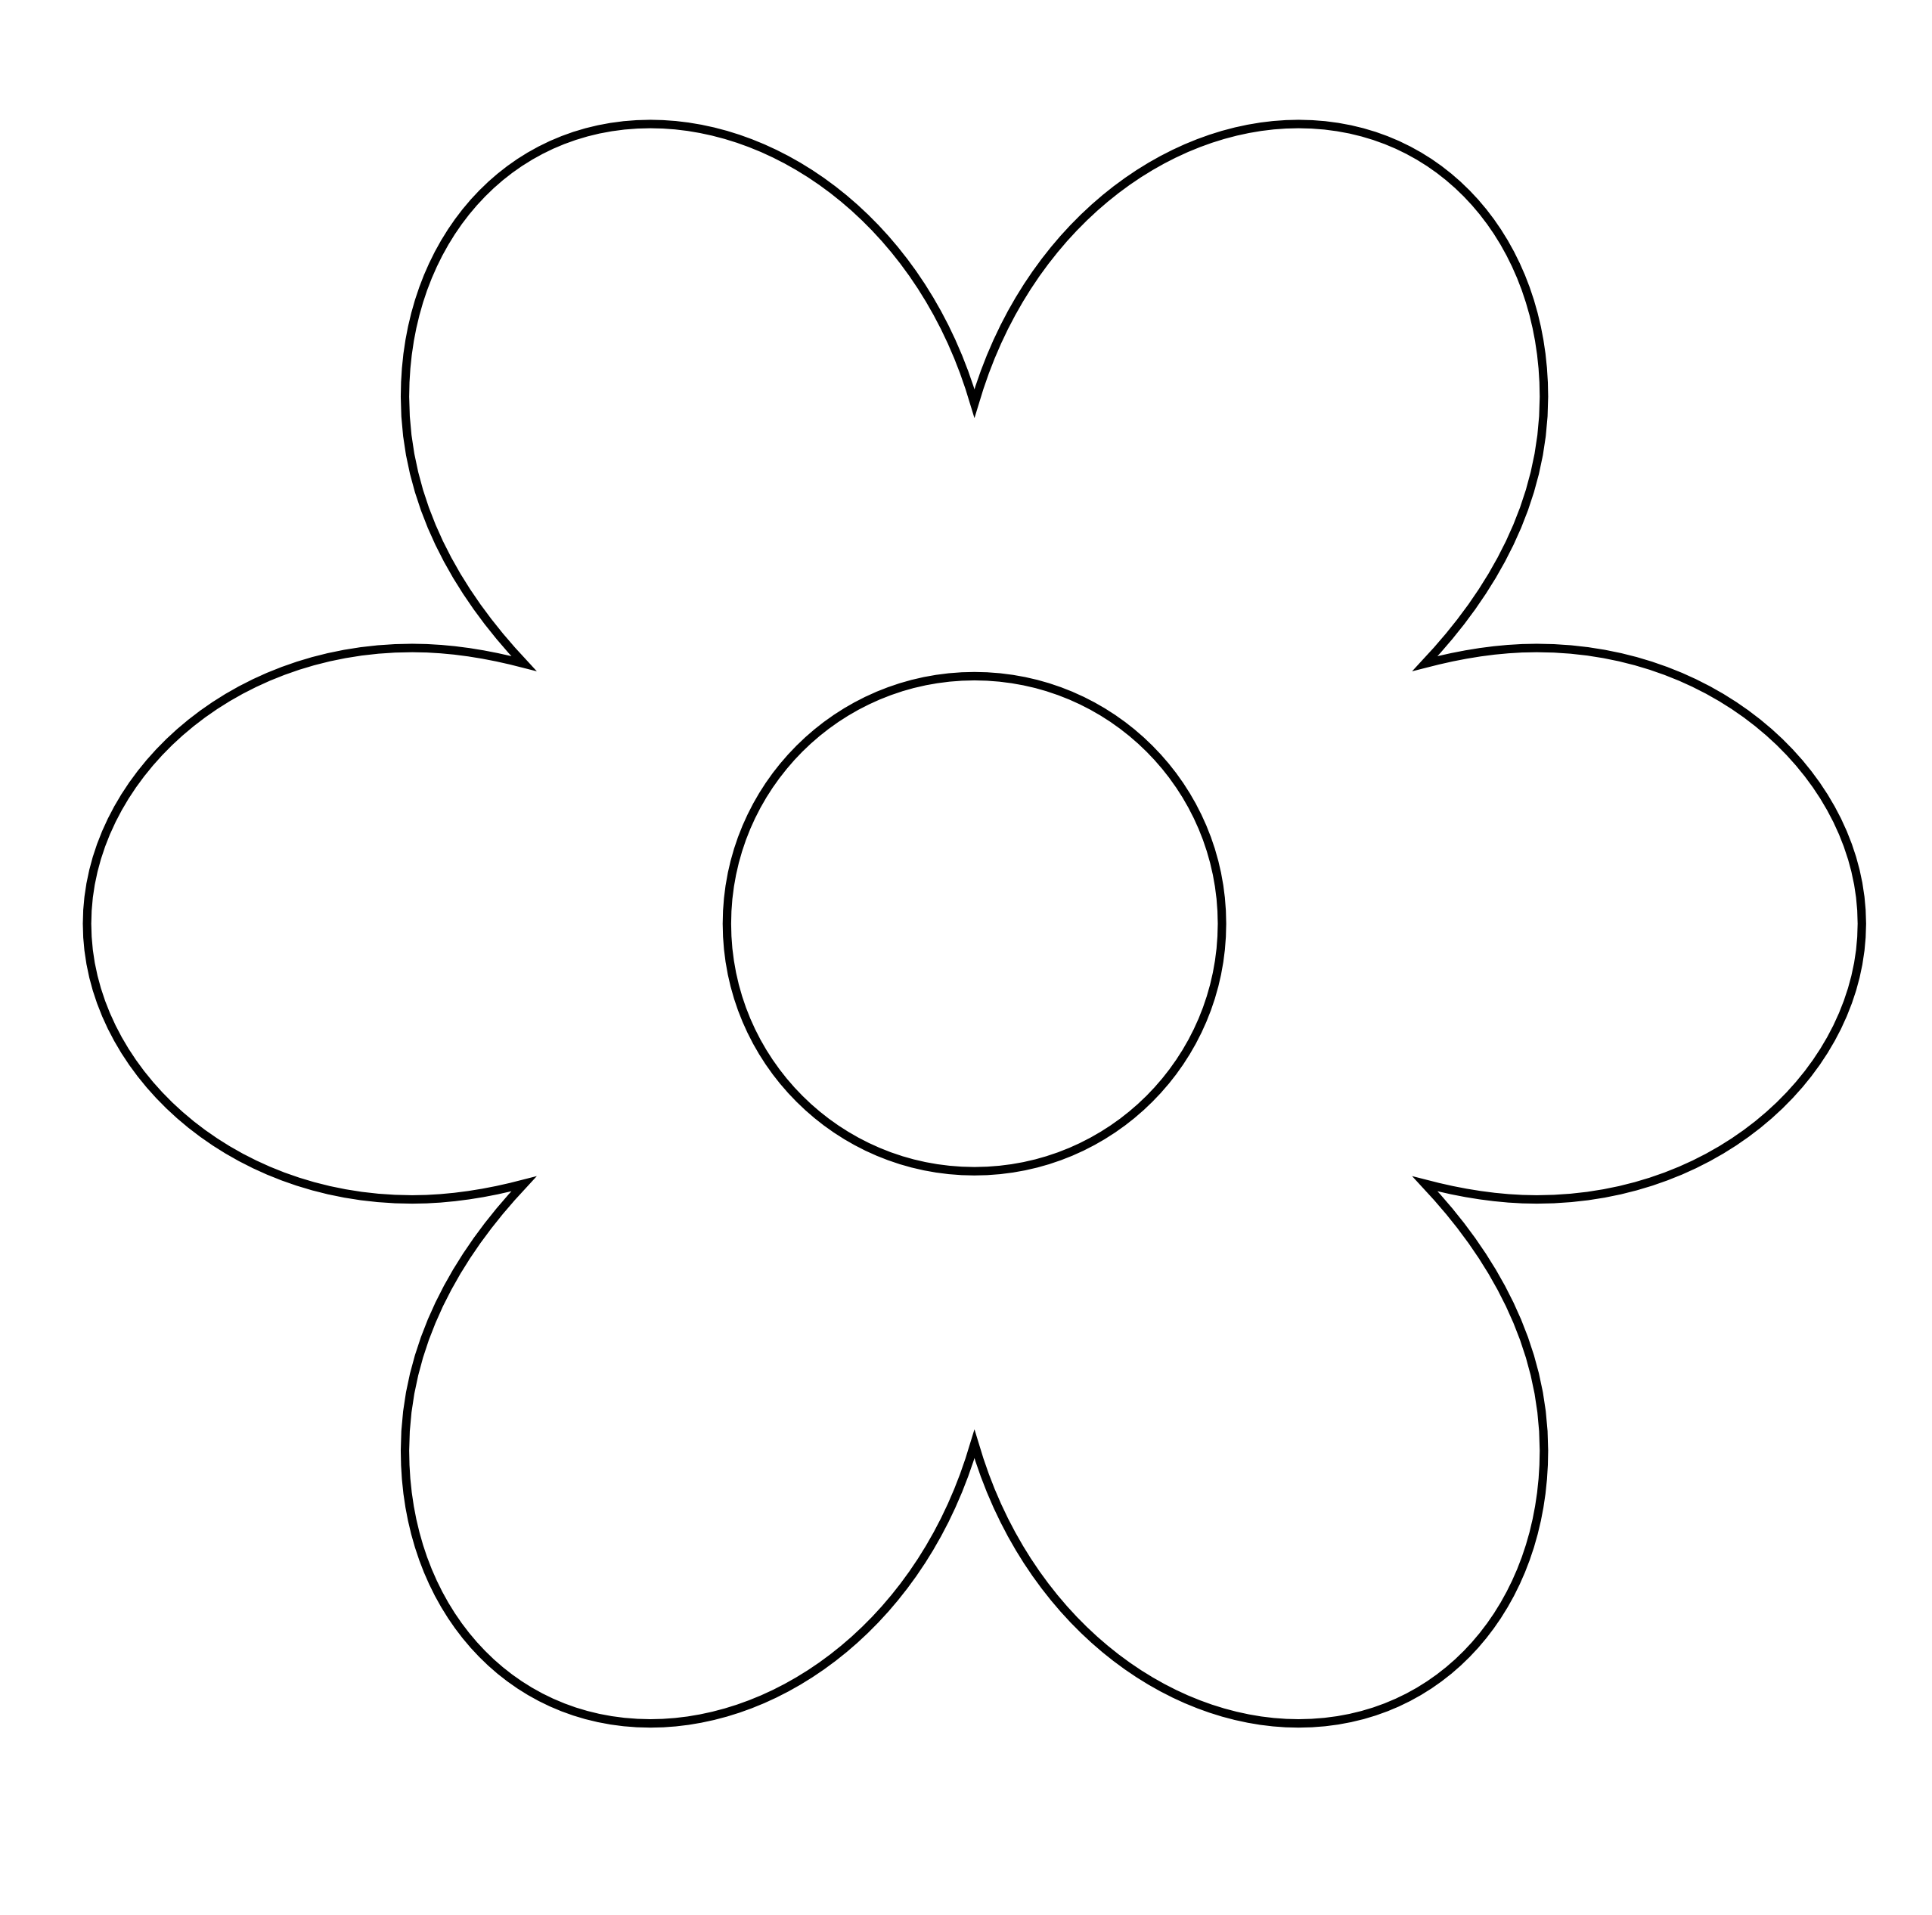 Black and White Flower Logo - Flower Black And White Transparent PNG Picture Icon and PNG